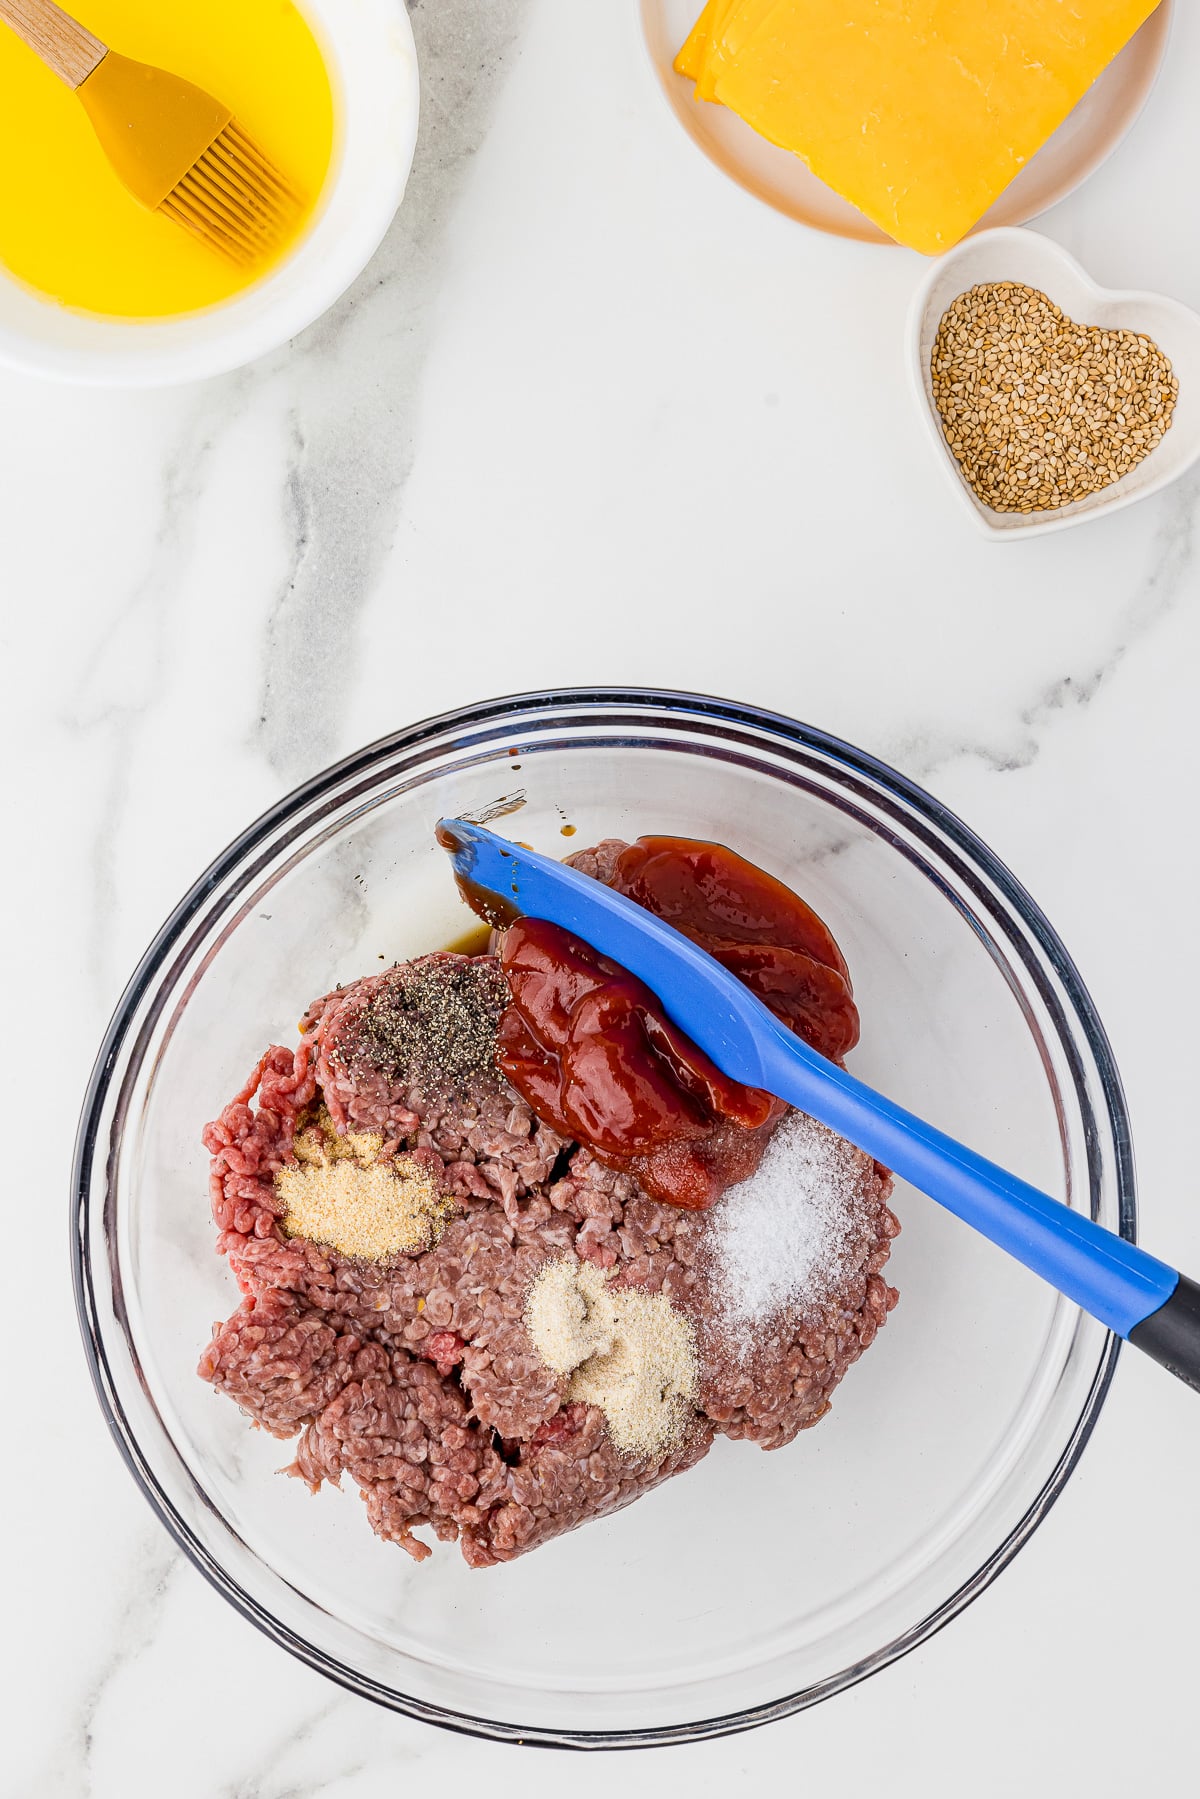 clear glass mixing bowl with raw ground meat, ketchup, spices and a blue spatula on a white marble countertop, with sliced cheese, sesame seeds and melted butter in the background